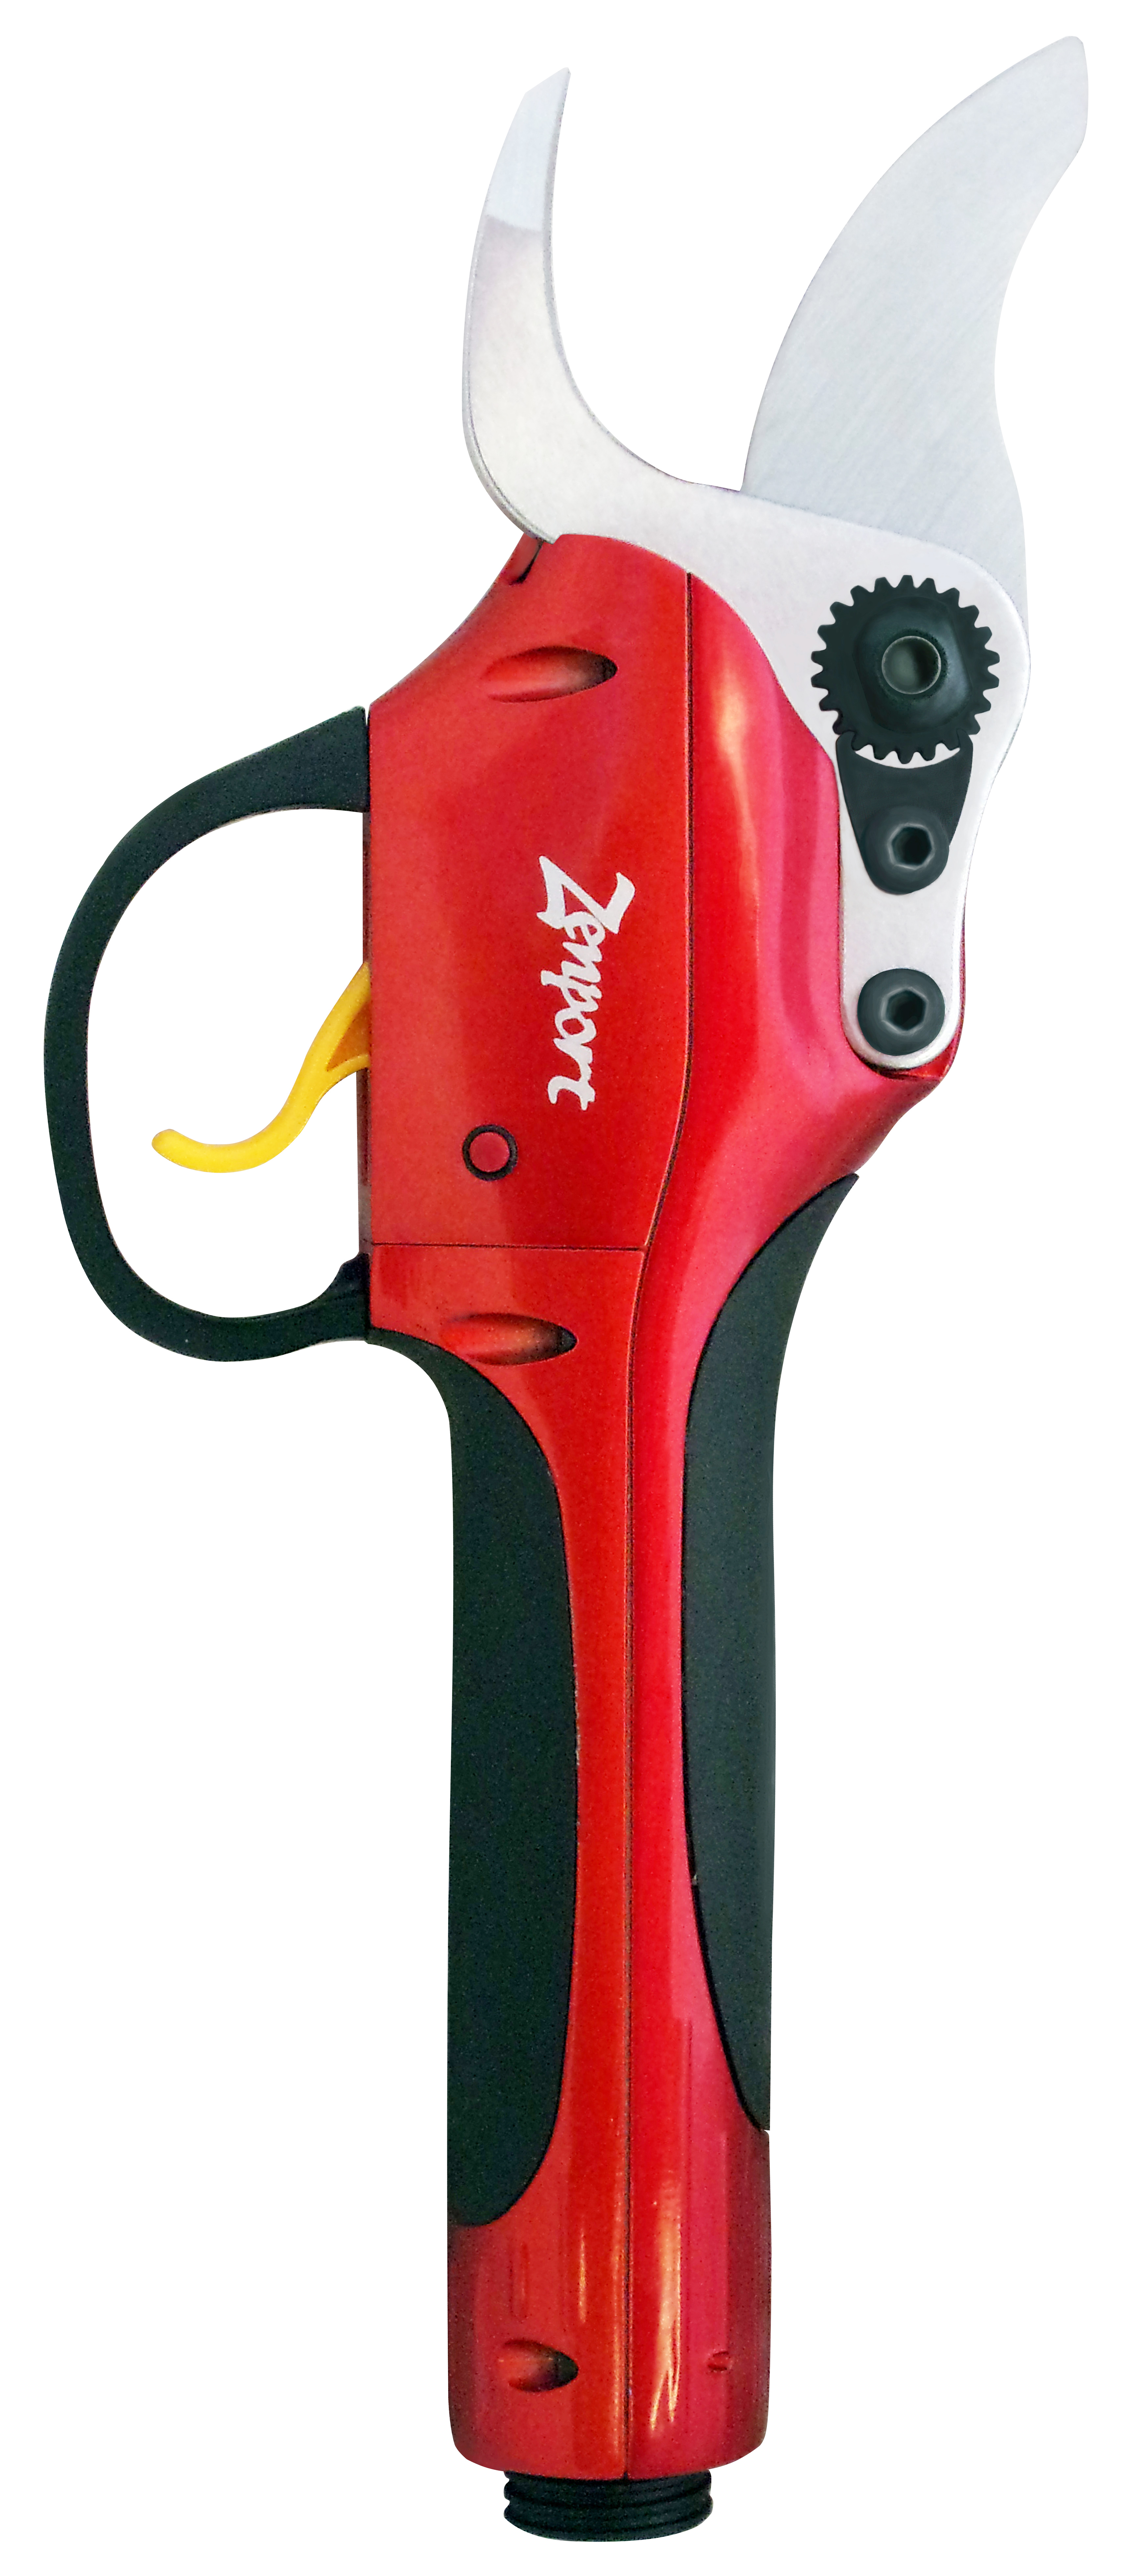 ePruner EP3-HEAD Large Pruner Head Only, Battery Powered Electric Pruner, 1.4-Inch Cut, 9-PIN